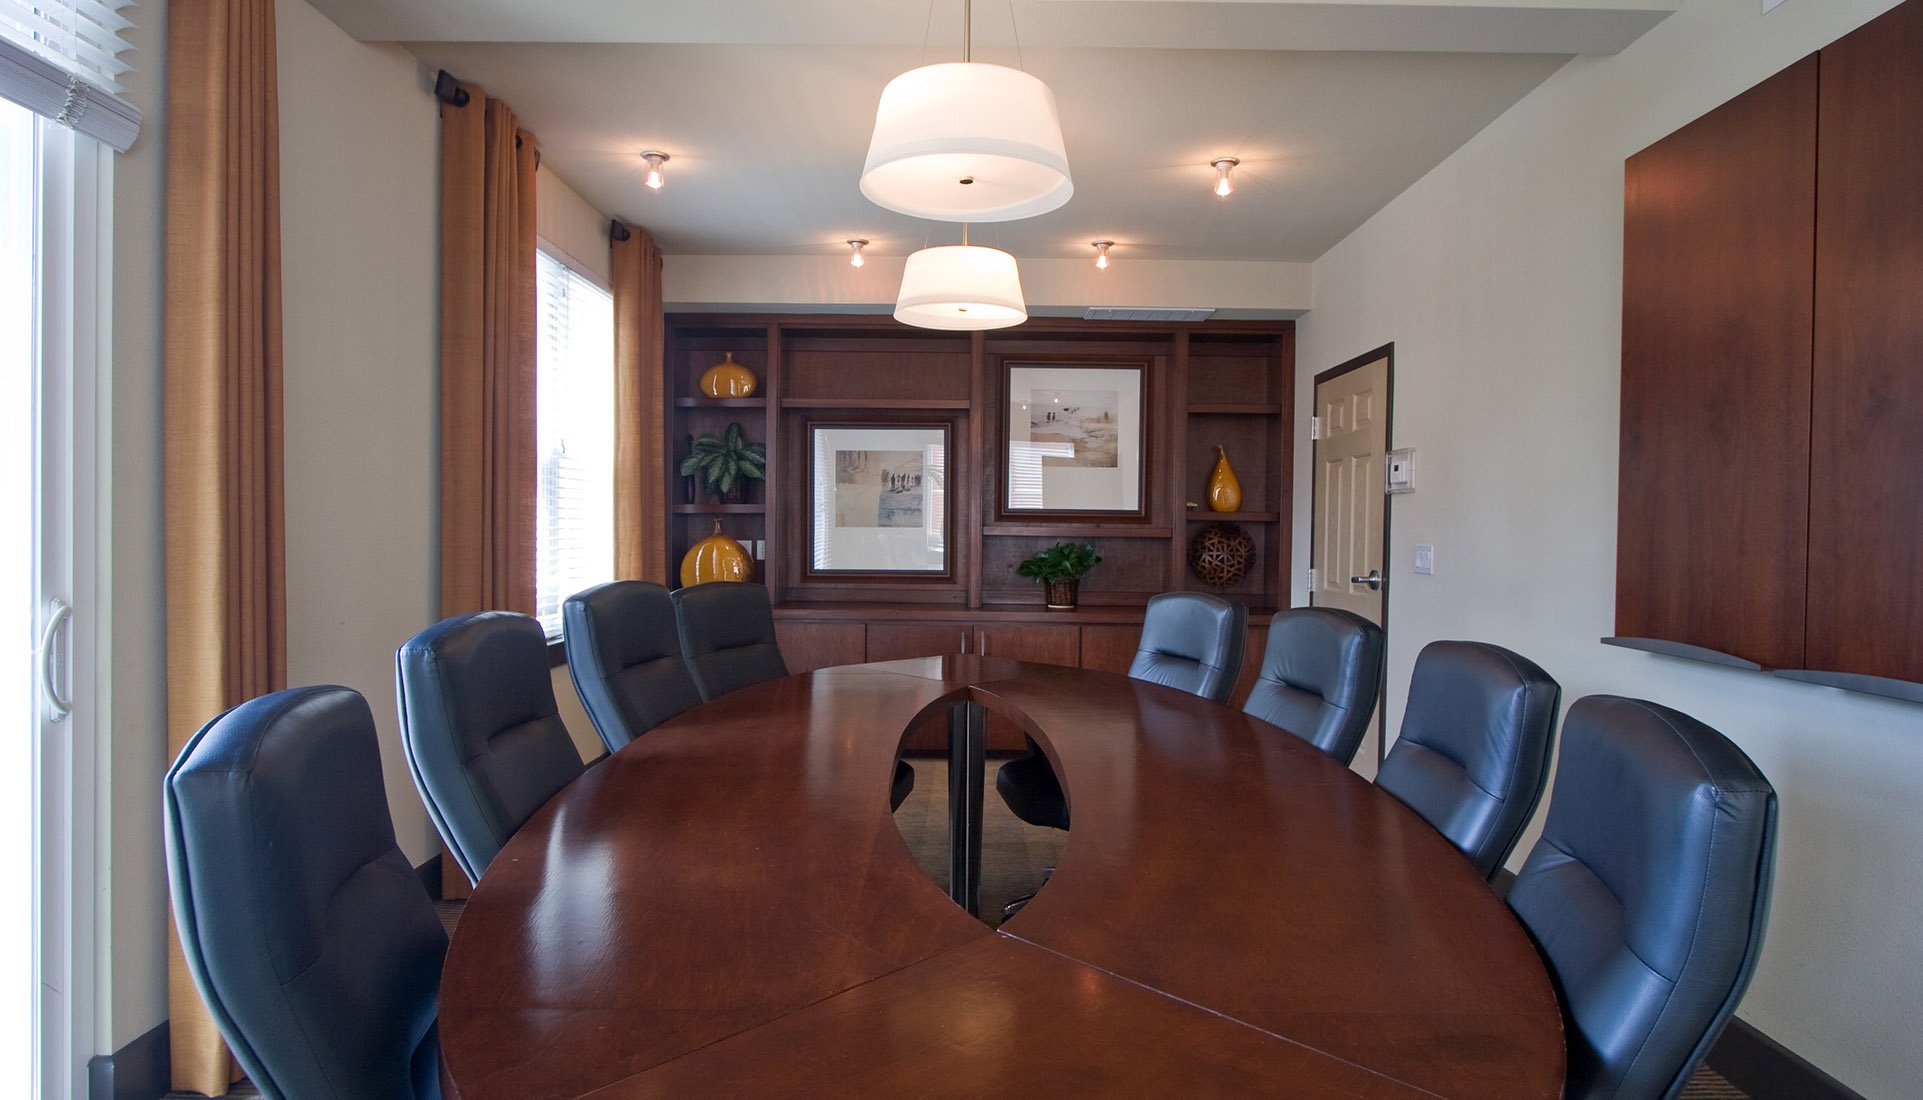 AVE Emeryville conference room